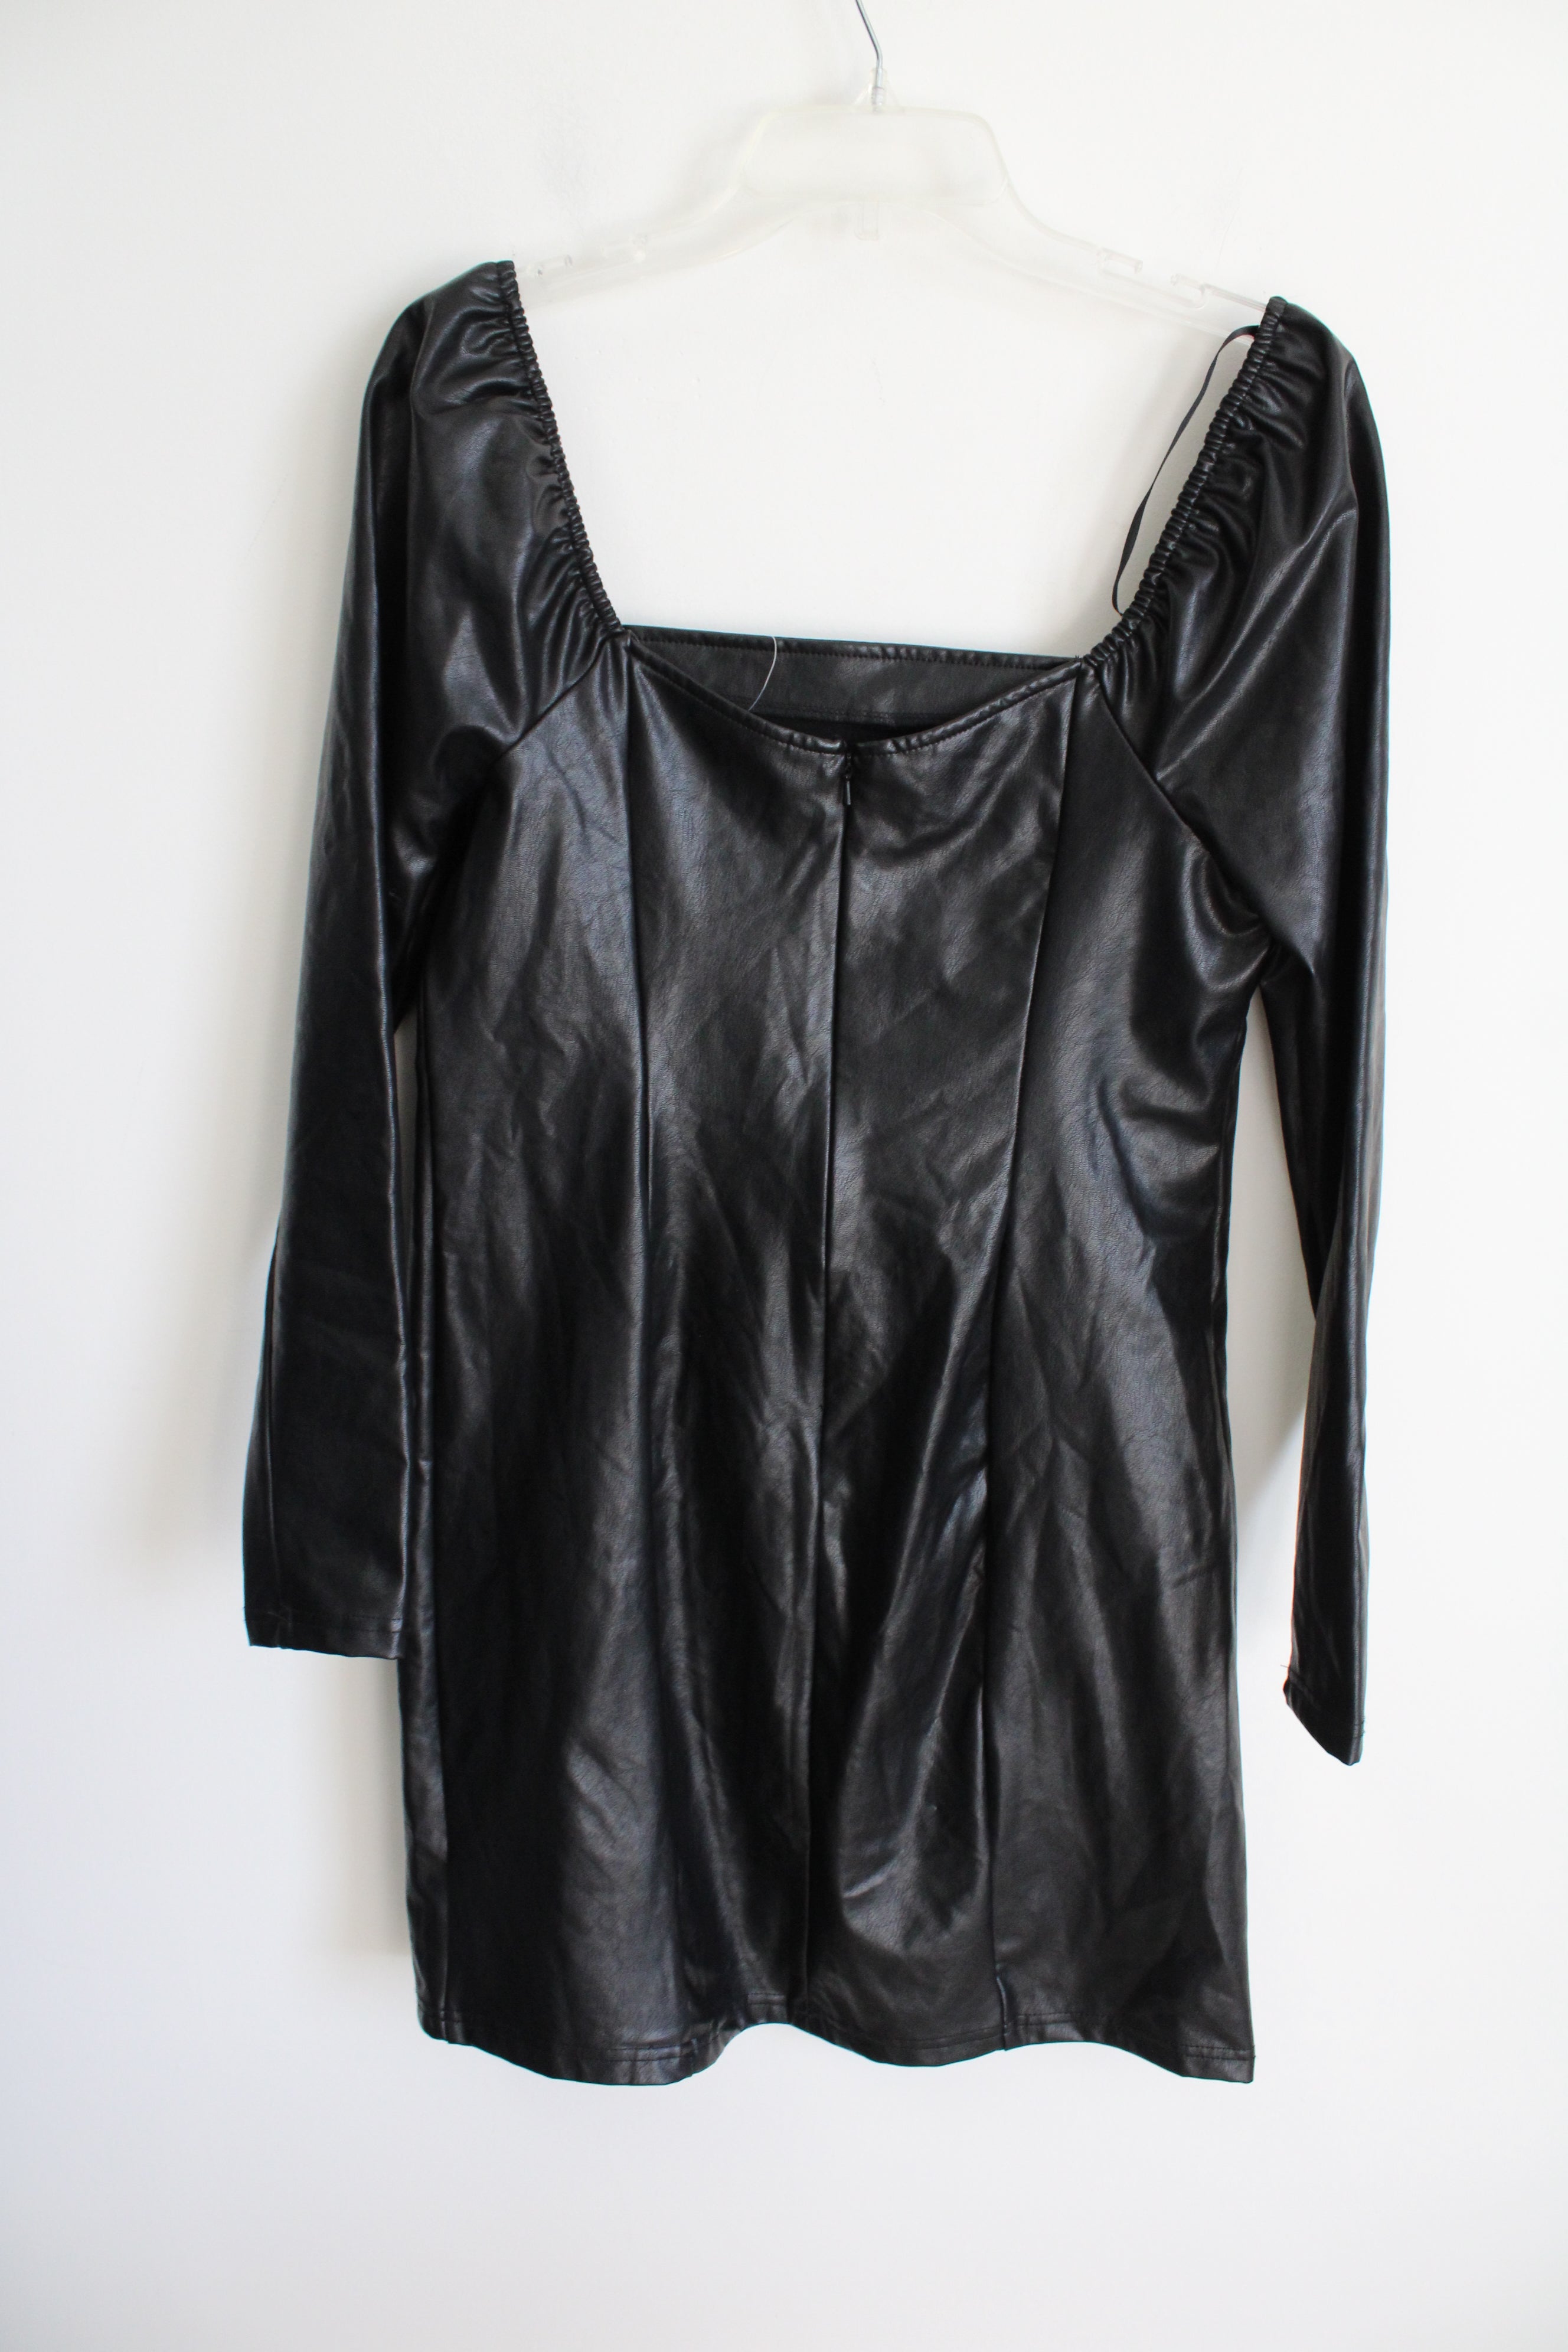 NEW Wild Fable Black Faux Leather Long Sleeved Dress | L